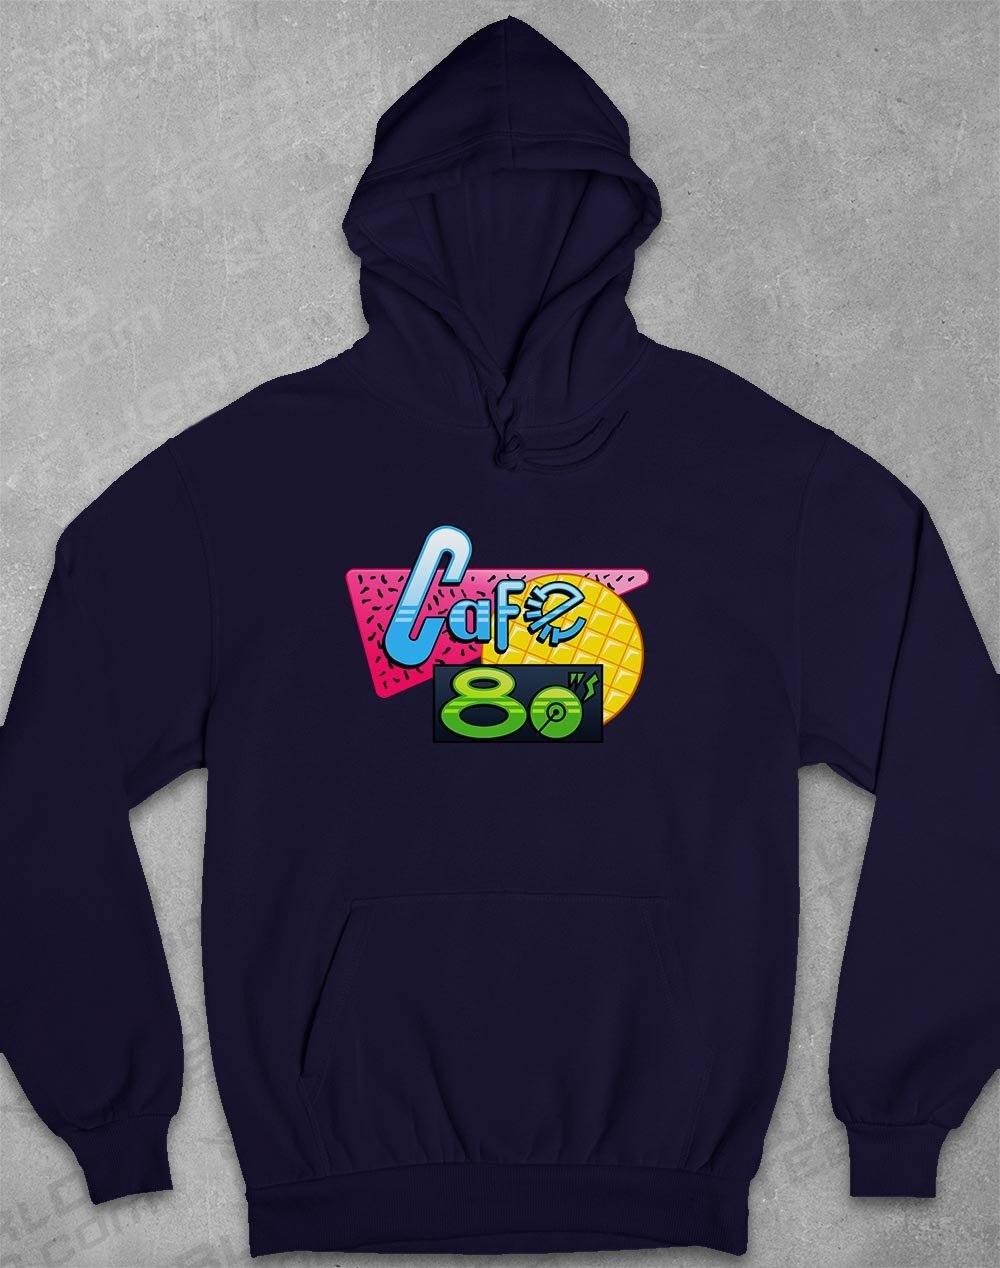 Cafe 80's Hoodie XS / Oxford Navy  - Off World Tees